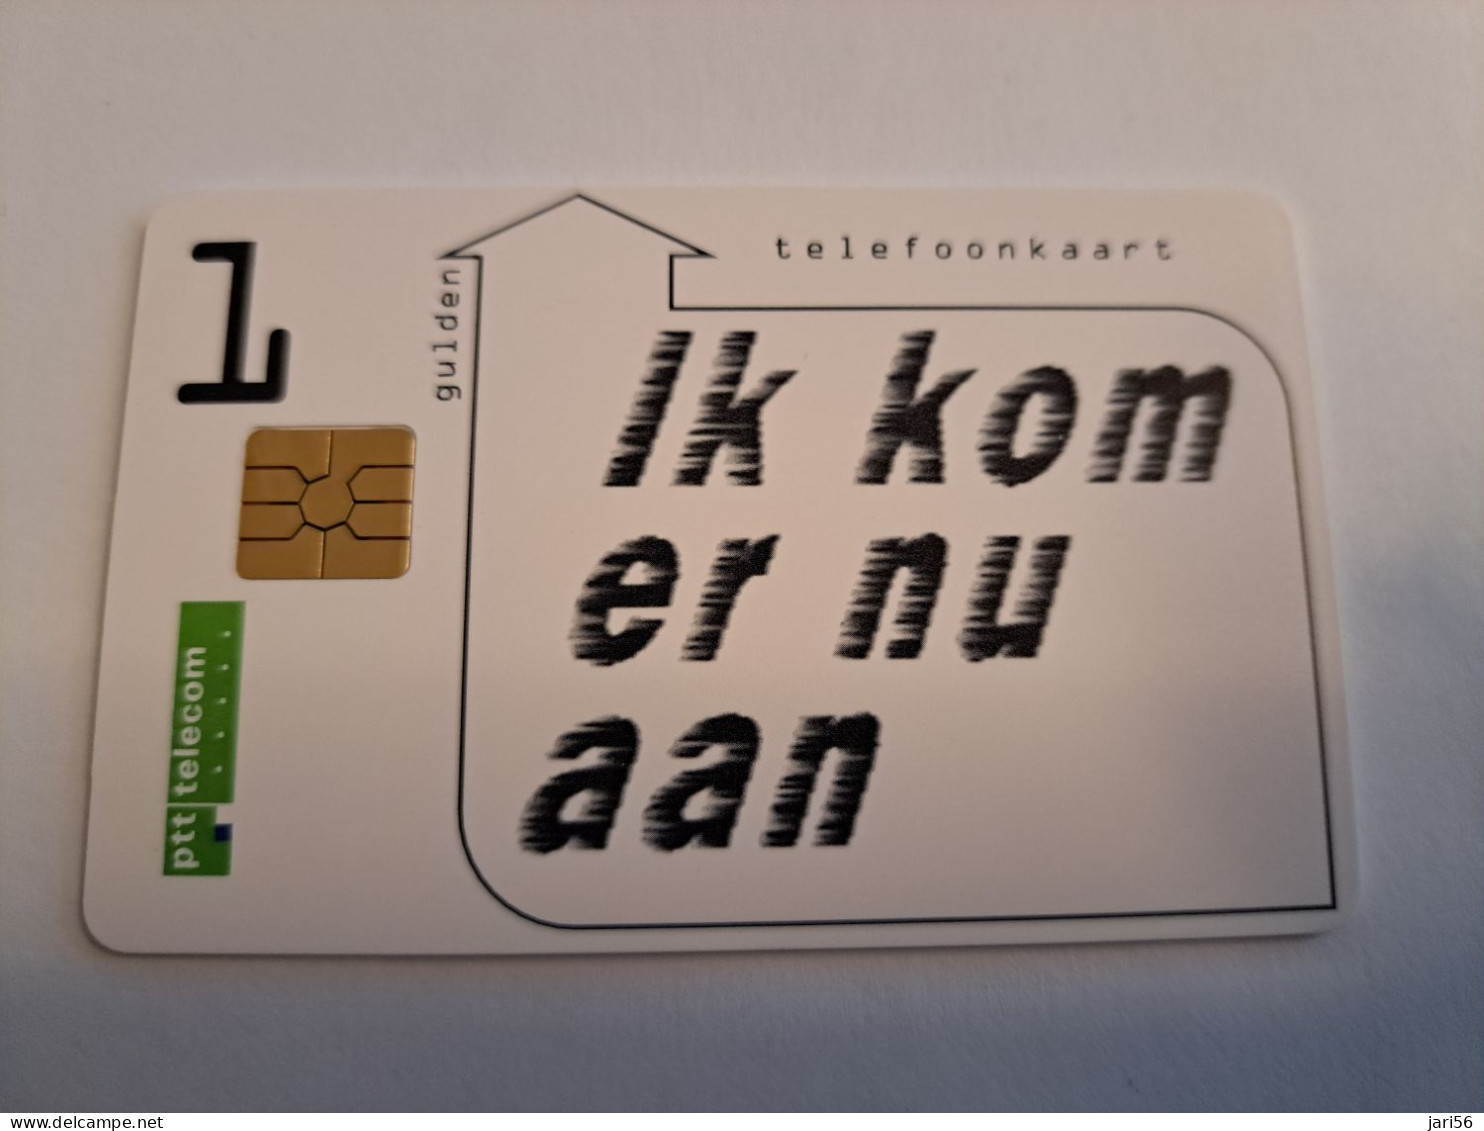 NETHERLANDS  HFL 1,00    CC  MINT CHIP CARD   / COMPLIMENTSCARD / FROM SERIE / MINT   ** 15953** - [3] Sim Cards, Prepaid & Refills